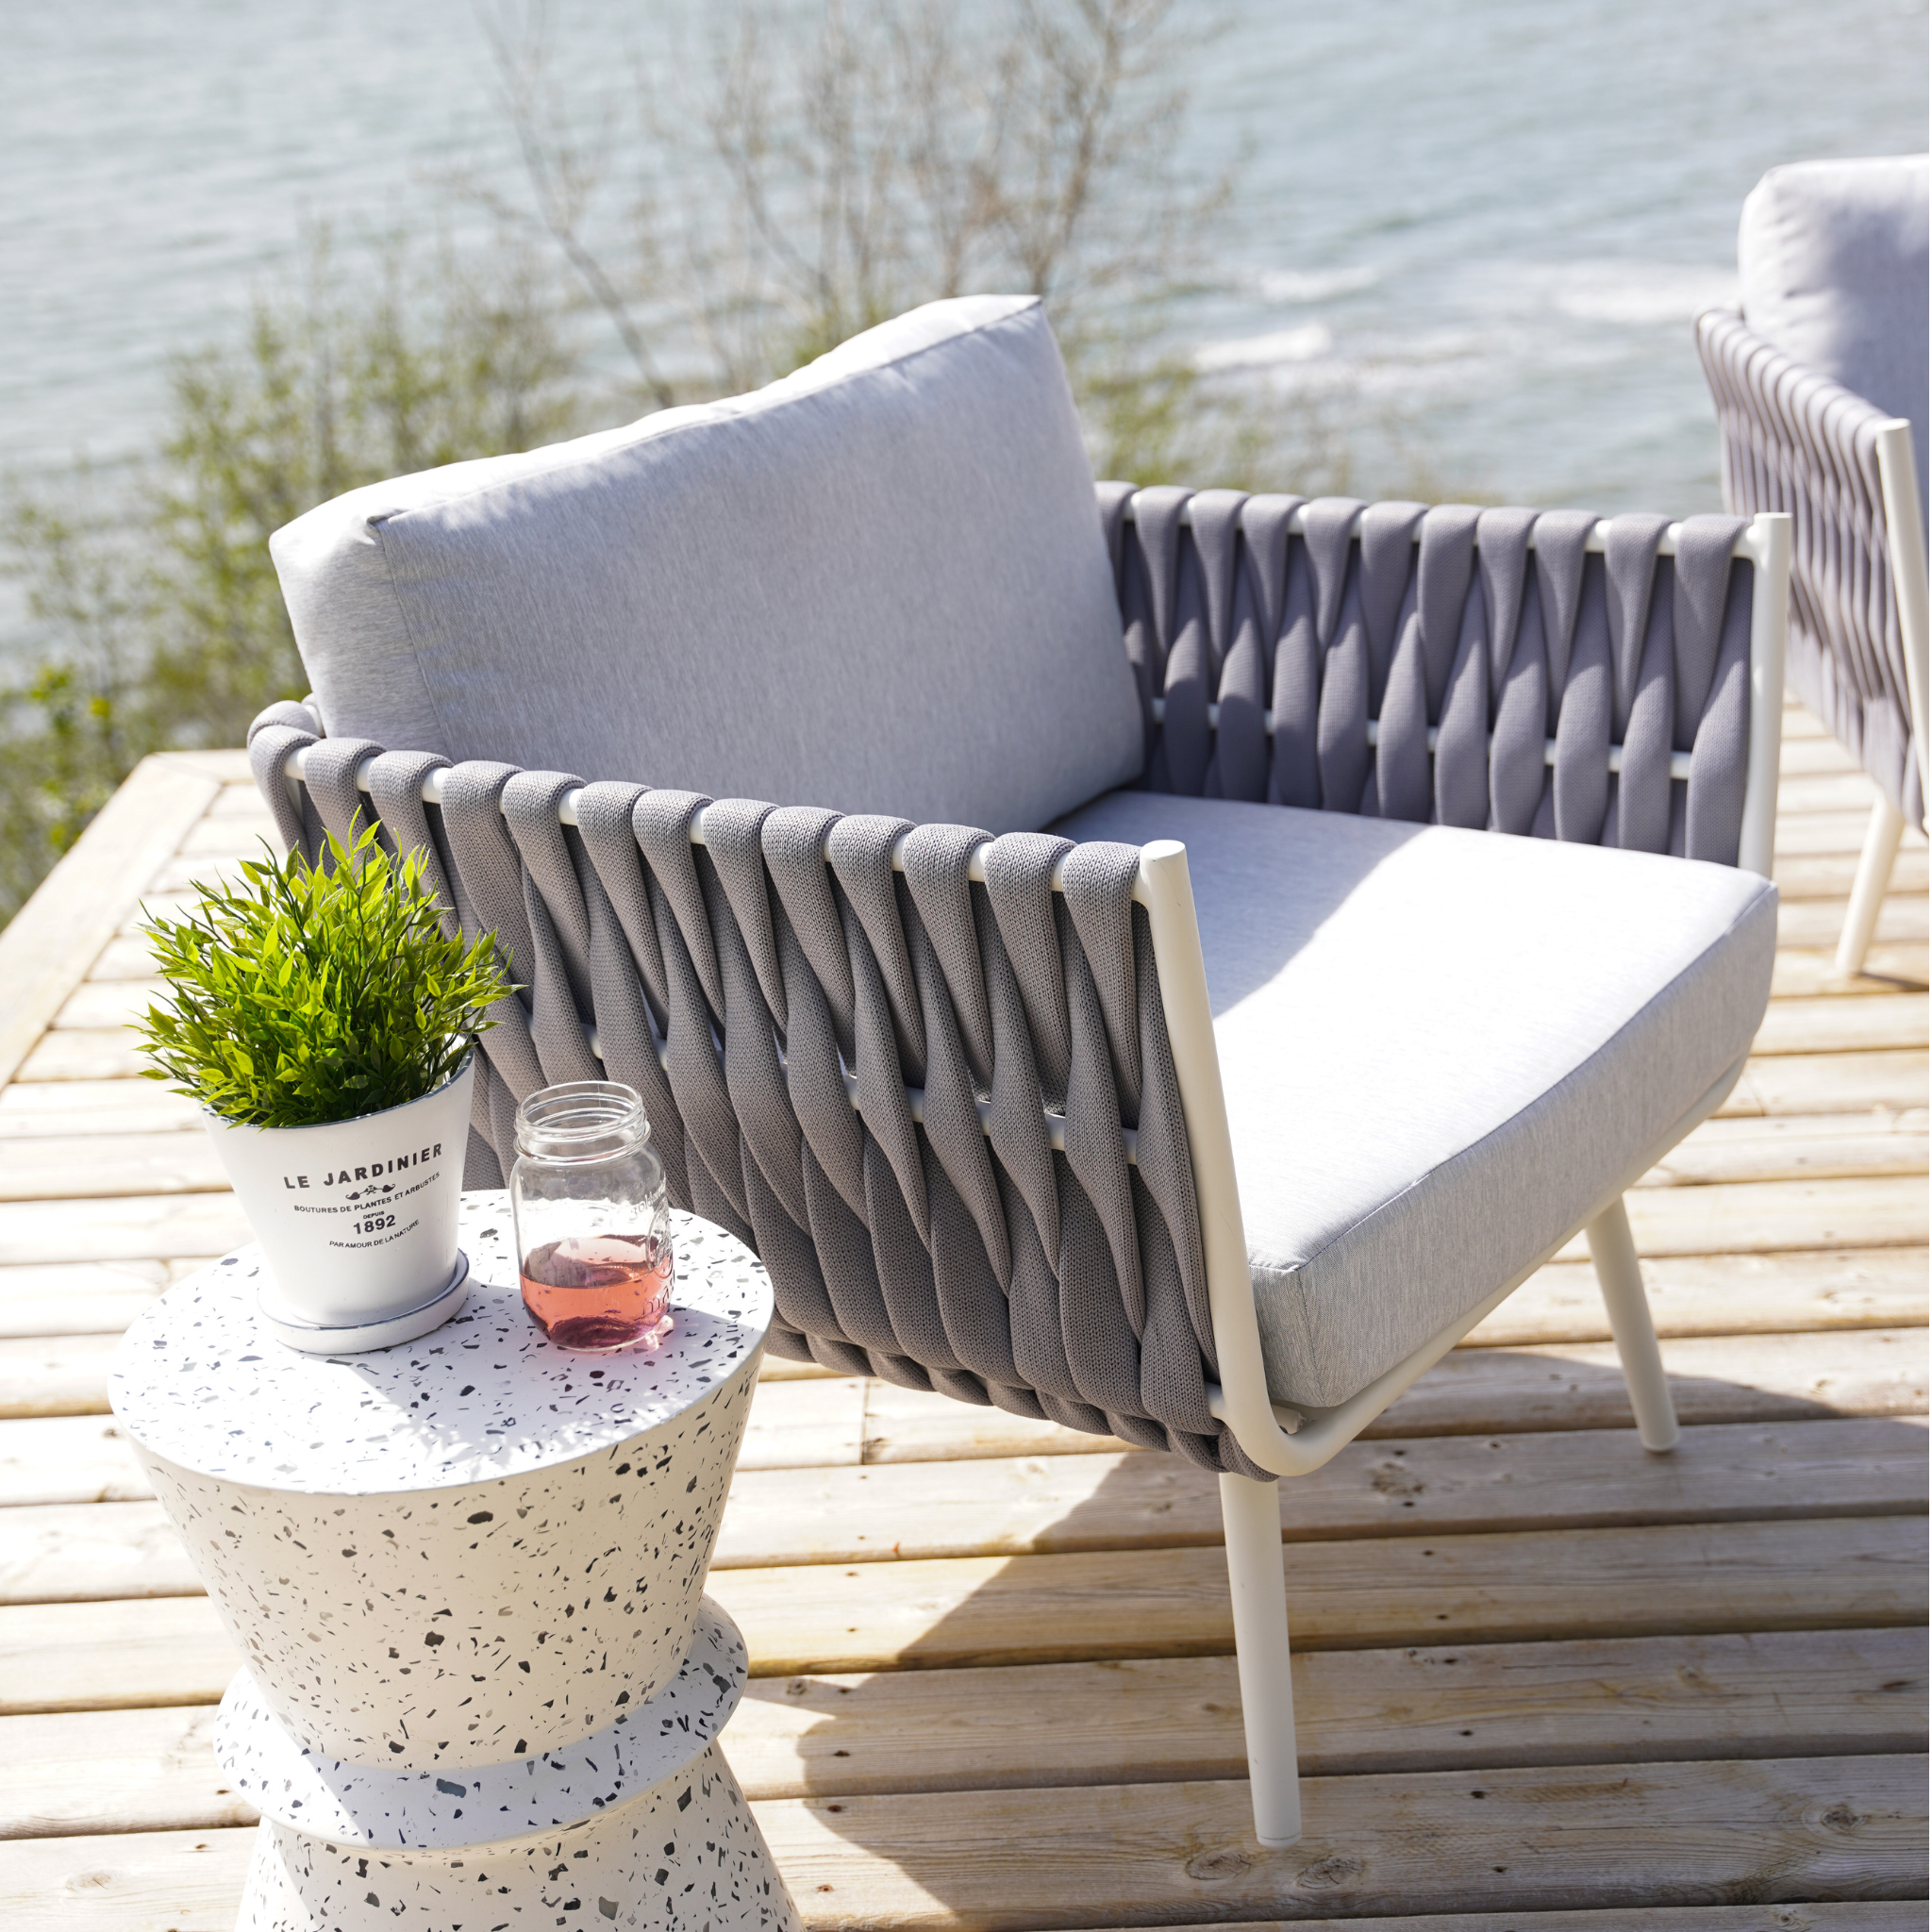 How Often Should I Clean My Outdoor Furniture?<br />
